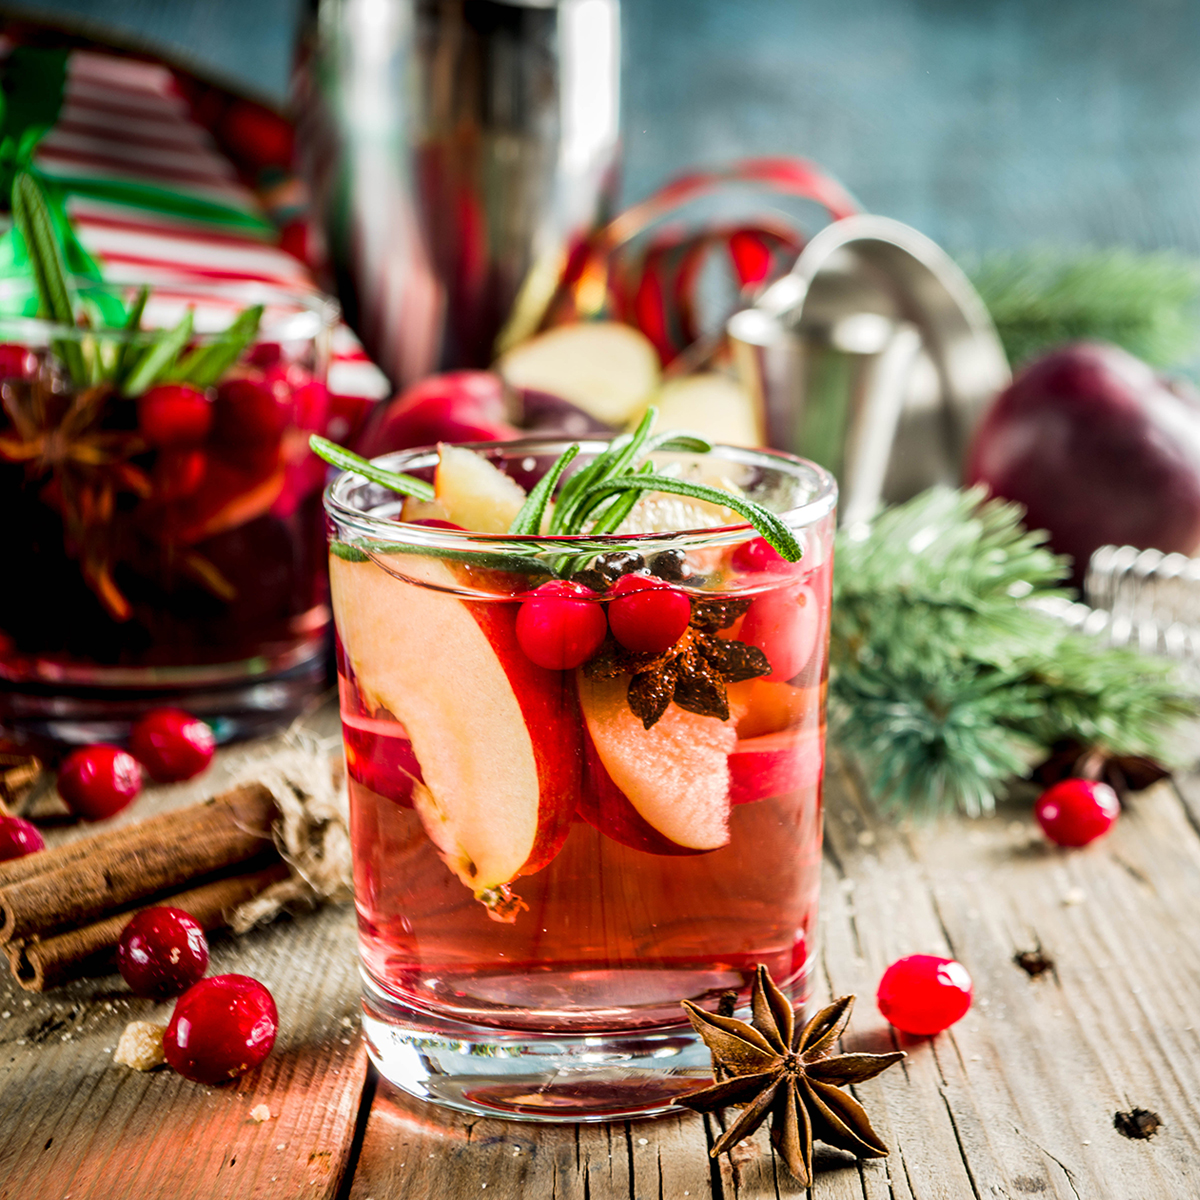 Warm Up Your System With This Mulled Wine